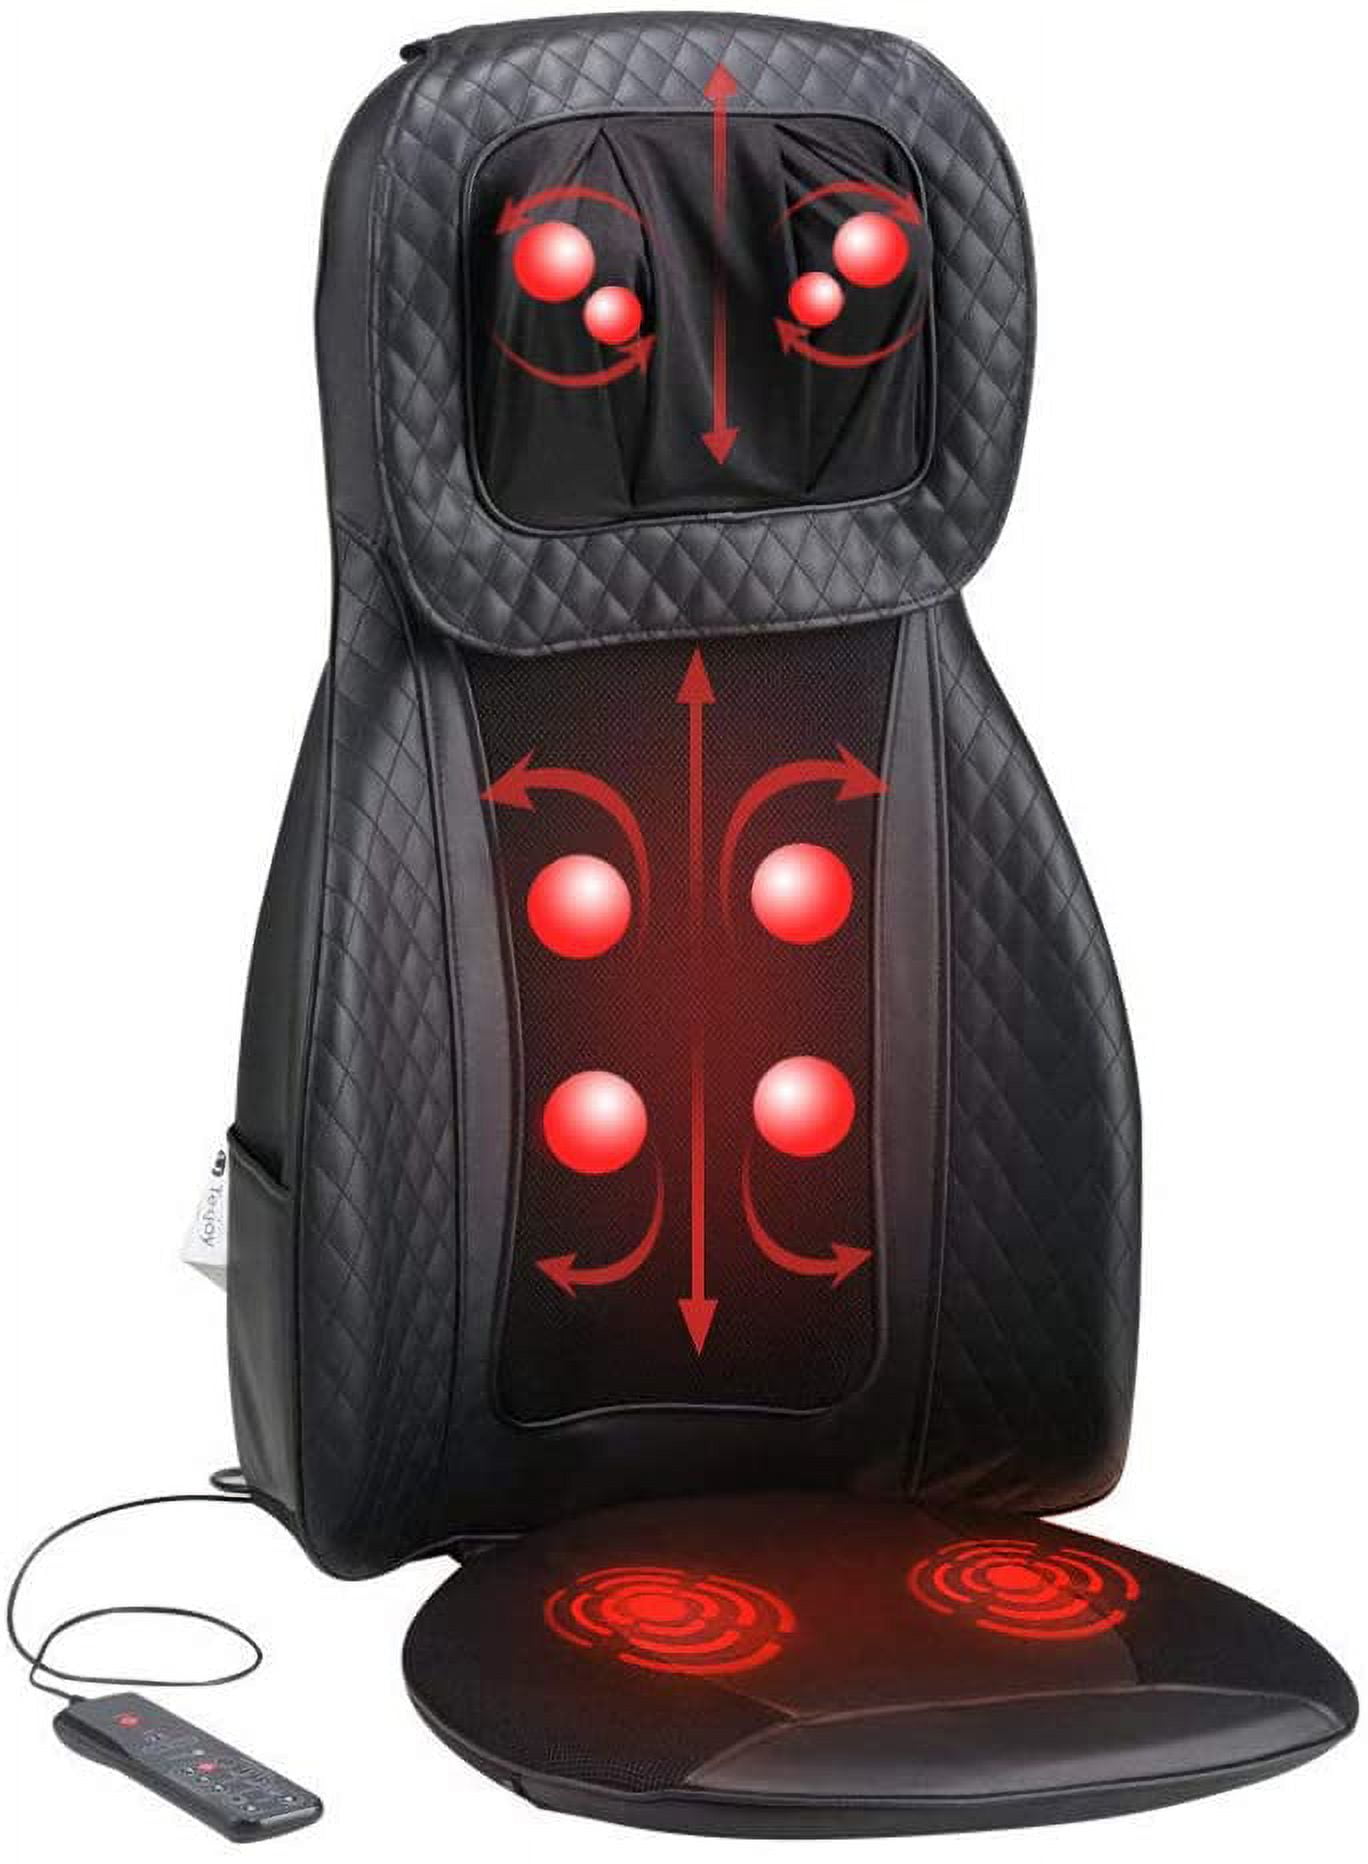 RBX Neck and Back Massager with Heat Deep Tissue Neck Massager for Pain  Relief Massage Heating Pillow, Chair and Car attachments Car Seat Mssager  for Vehicle While Driving : Health & Household 